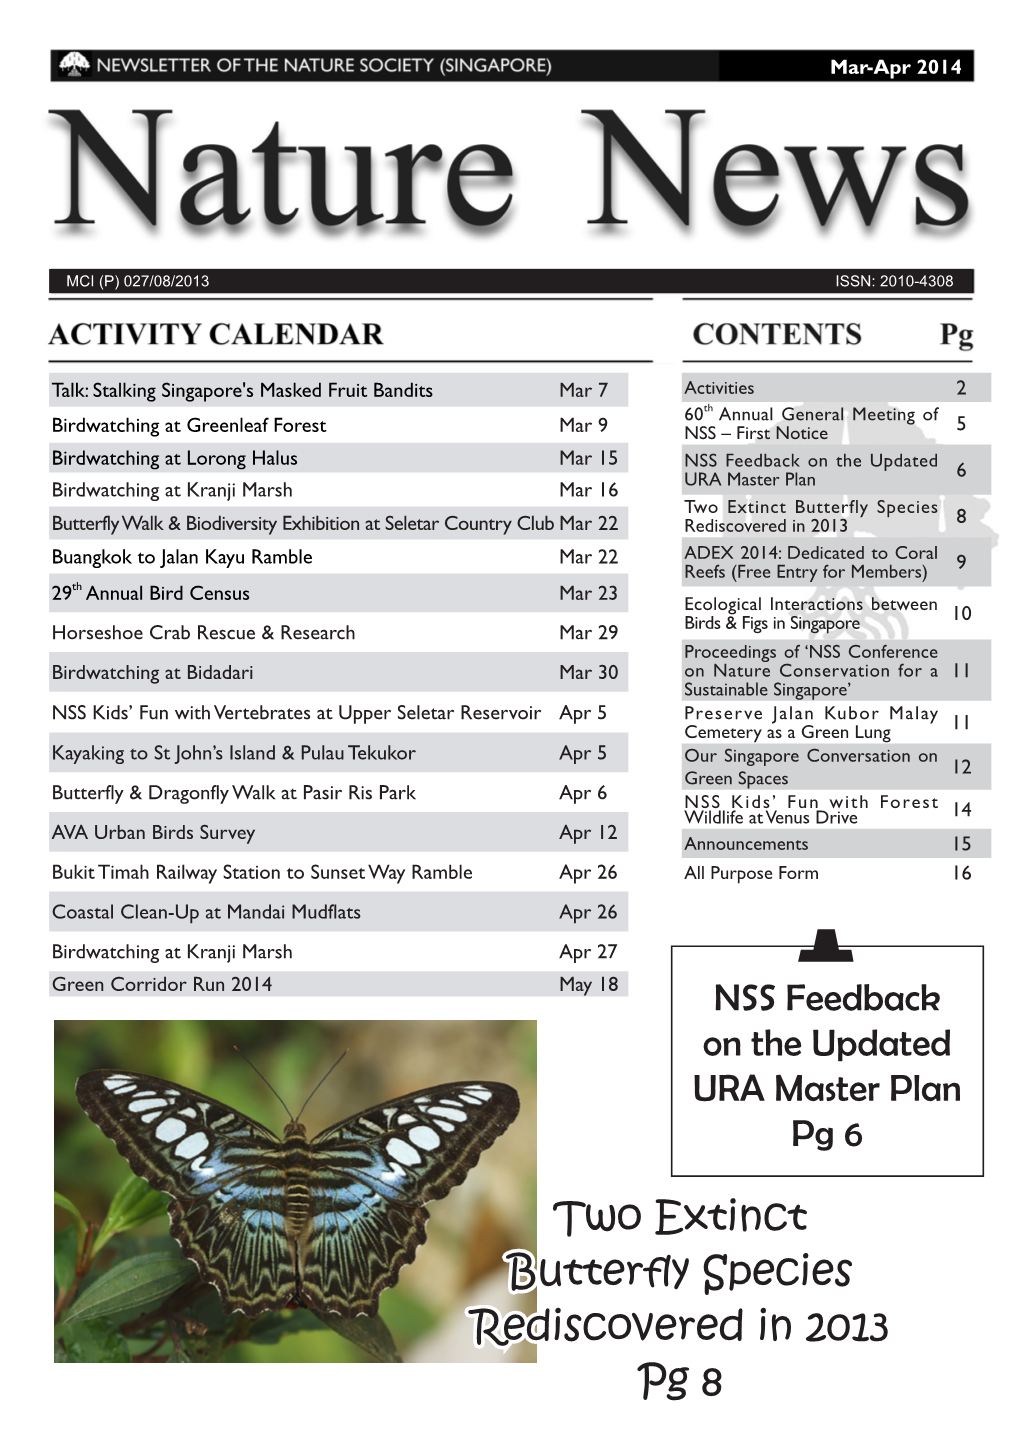 Two Extinct Butterfly Species Rediscovered in 2013 Pg 8 1 NATURE NEWS MAR-APR 2014